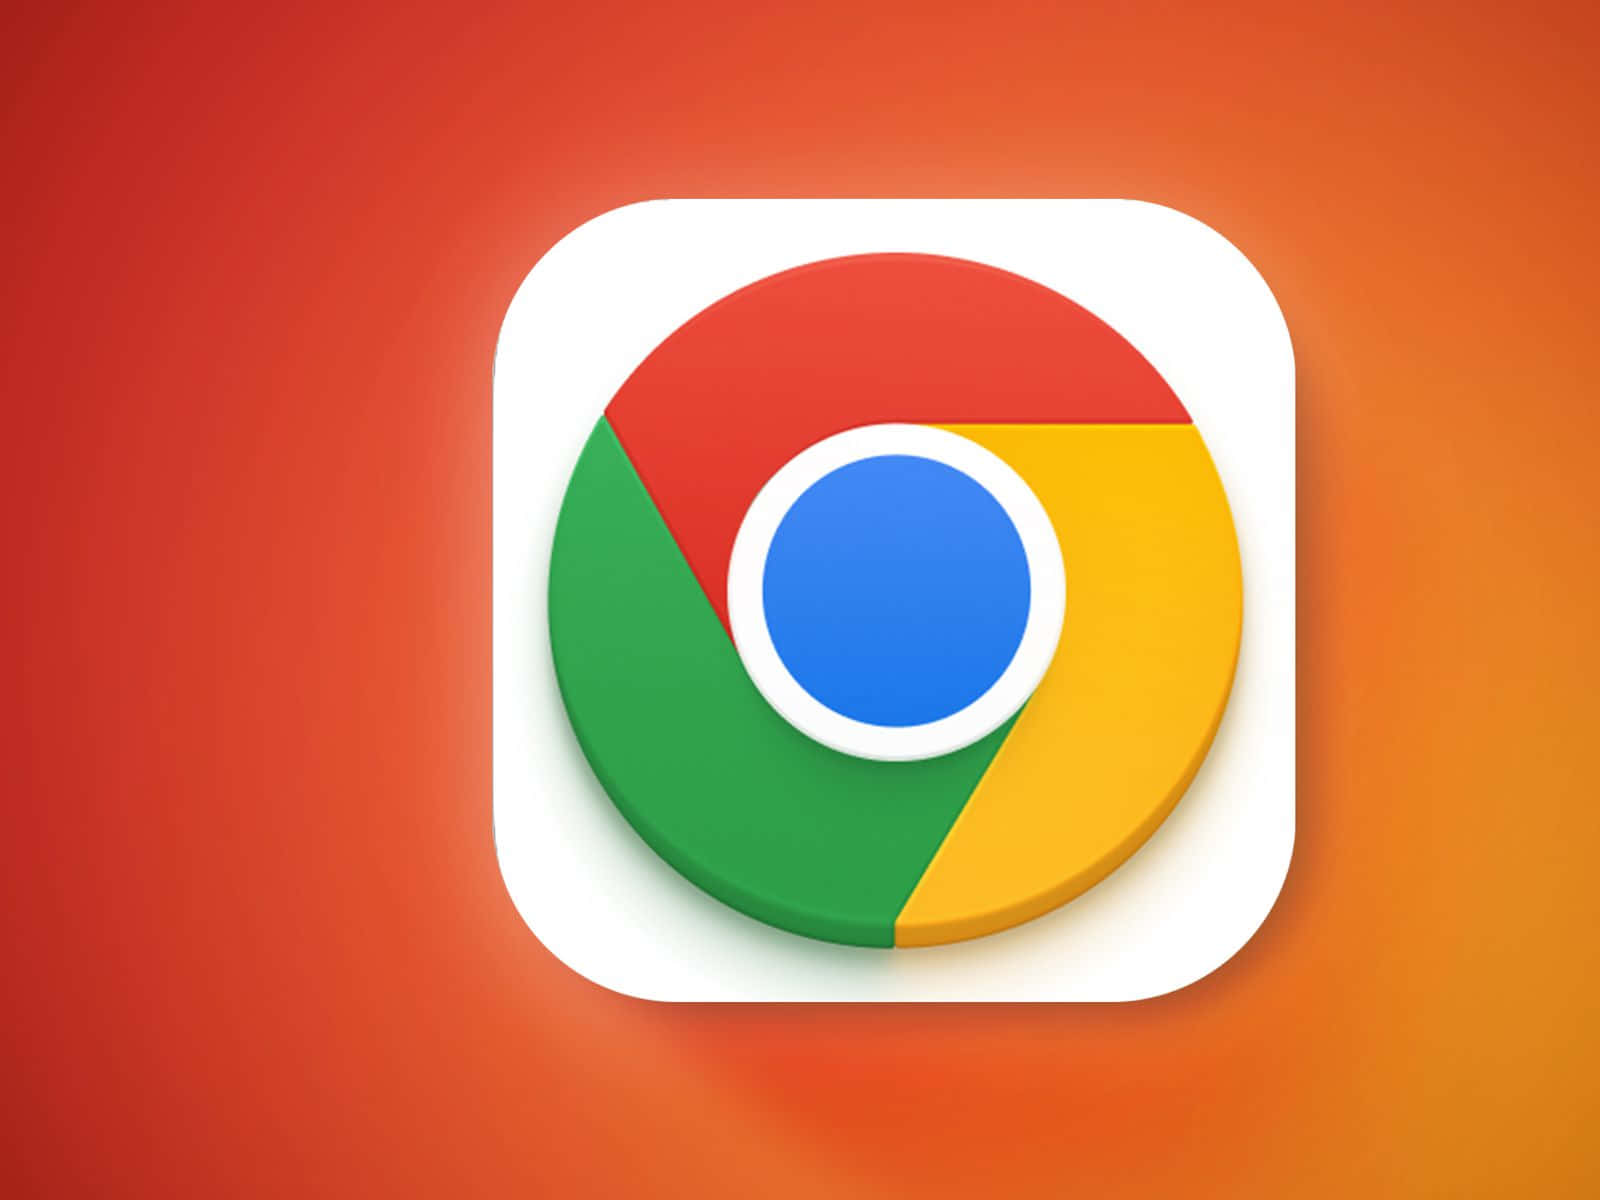 Chrome surfing the web for all your needs